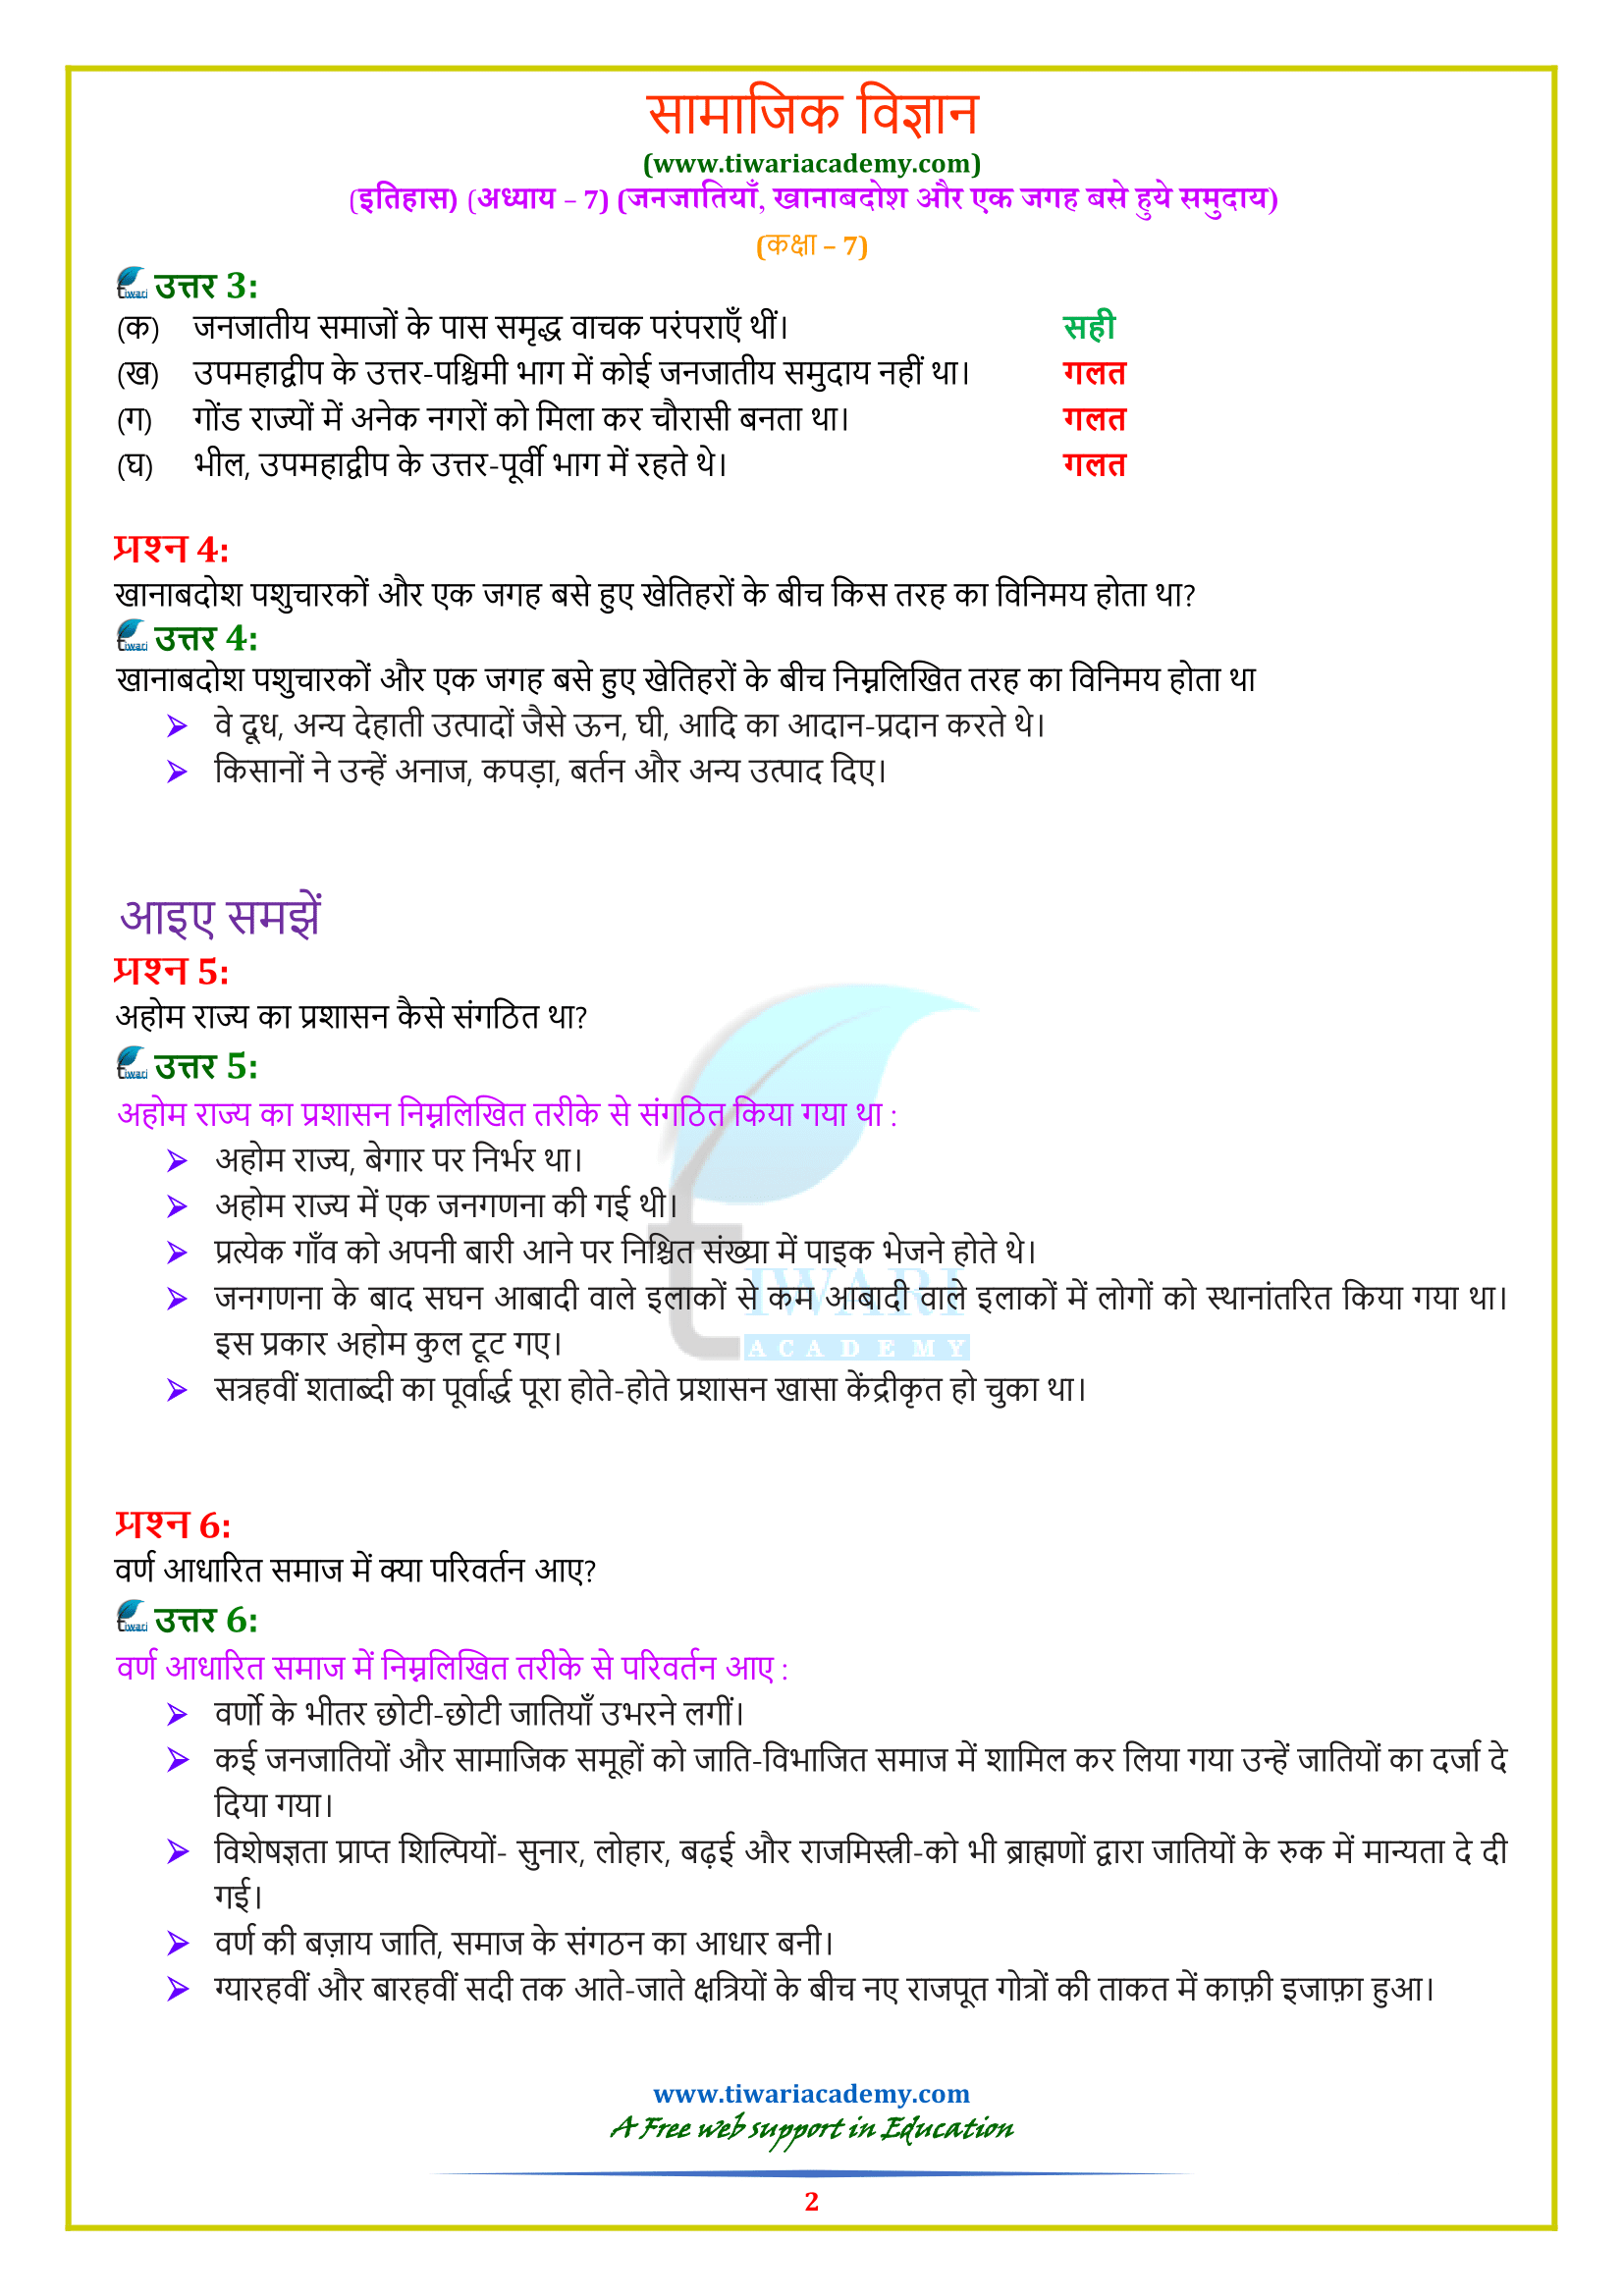 NCERT Solutions for Class 7 History Chapter 7 in Hindi